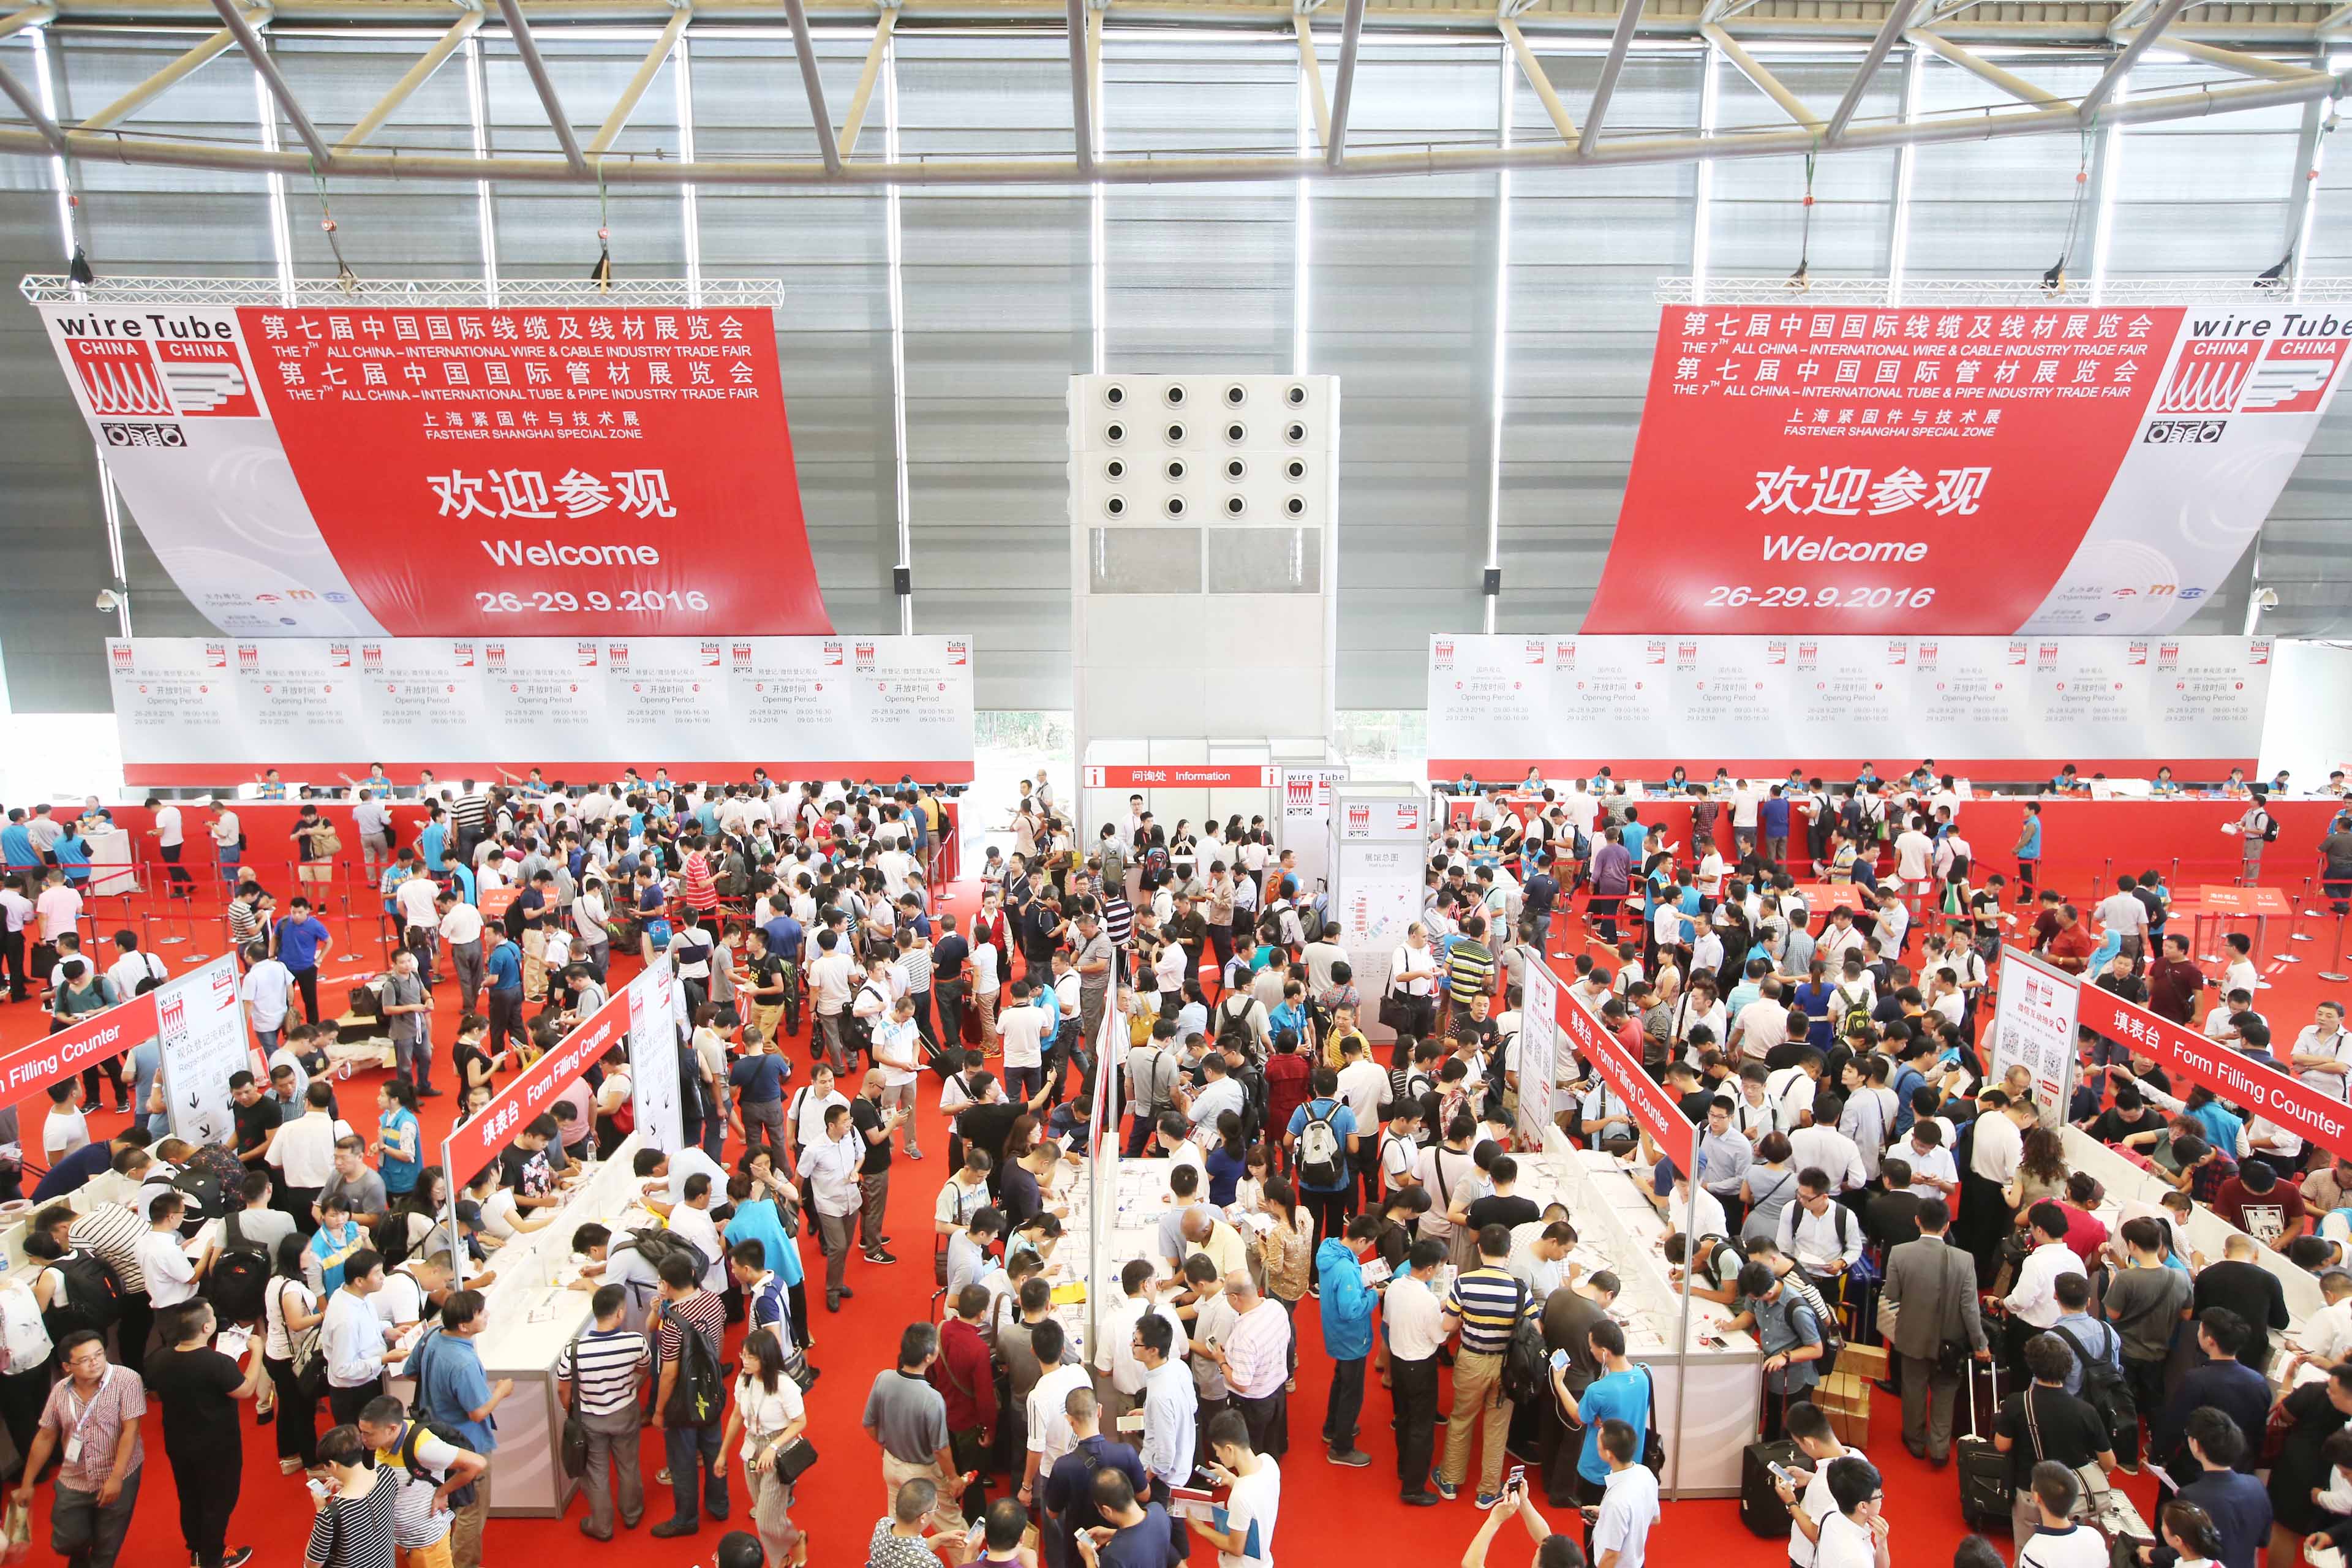 Autumn 2018 reunion sparks on-going booth reservations for the next wire & Tube China.